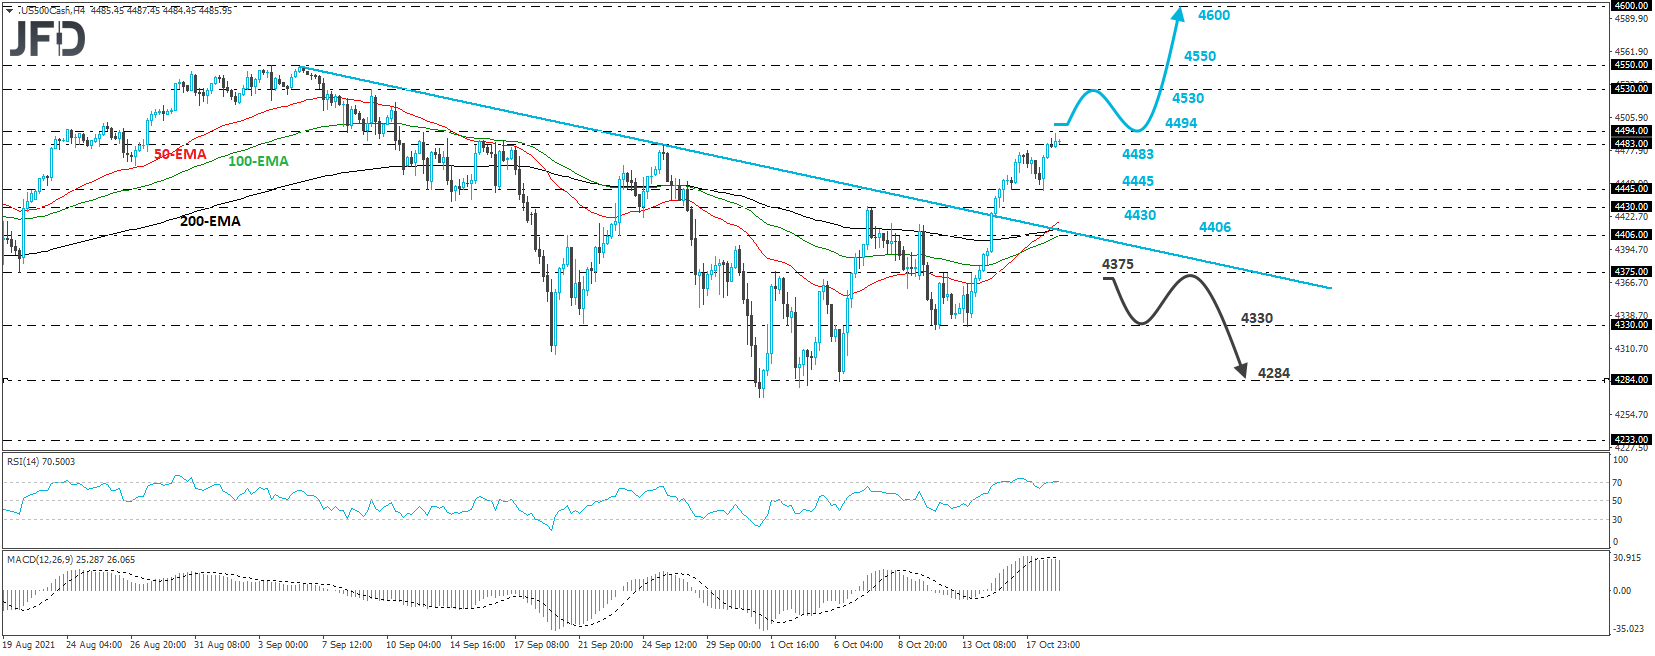 S&P 500 cash index 4-hour chart technical analysis.